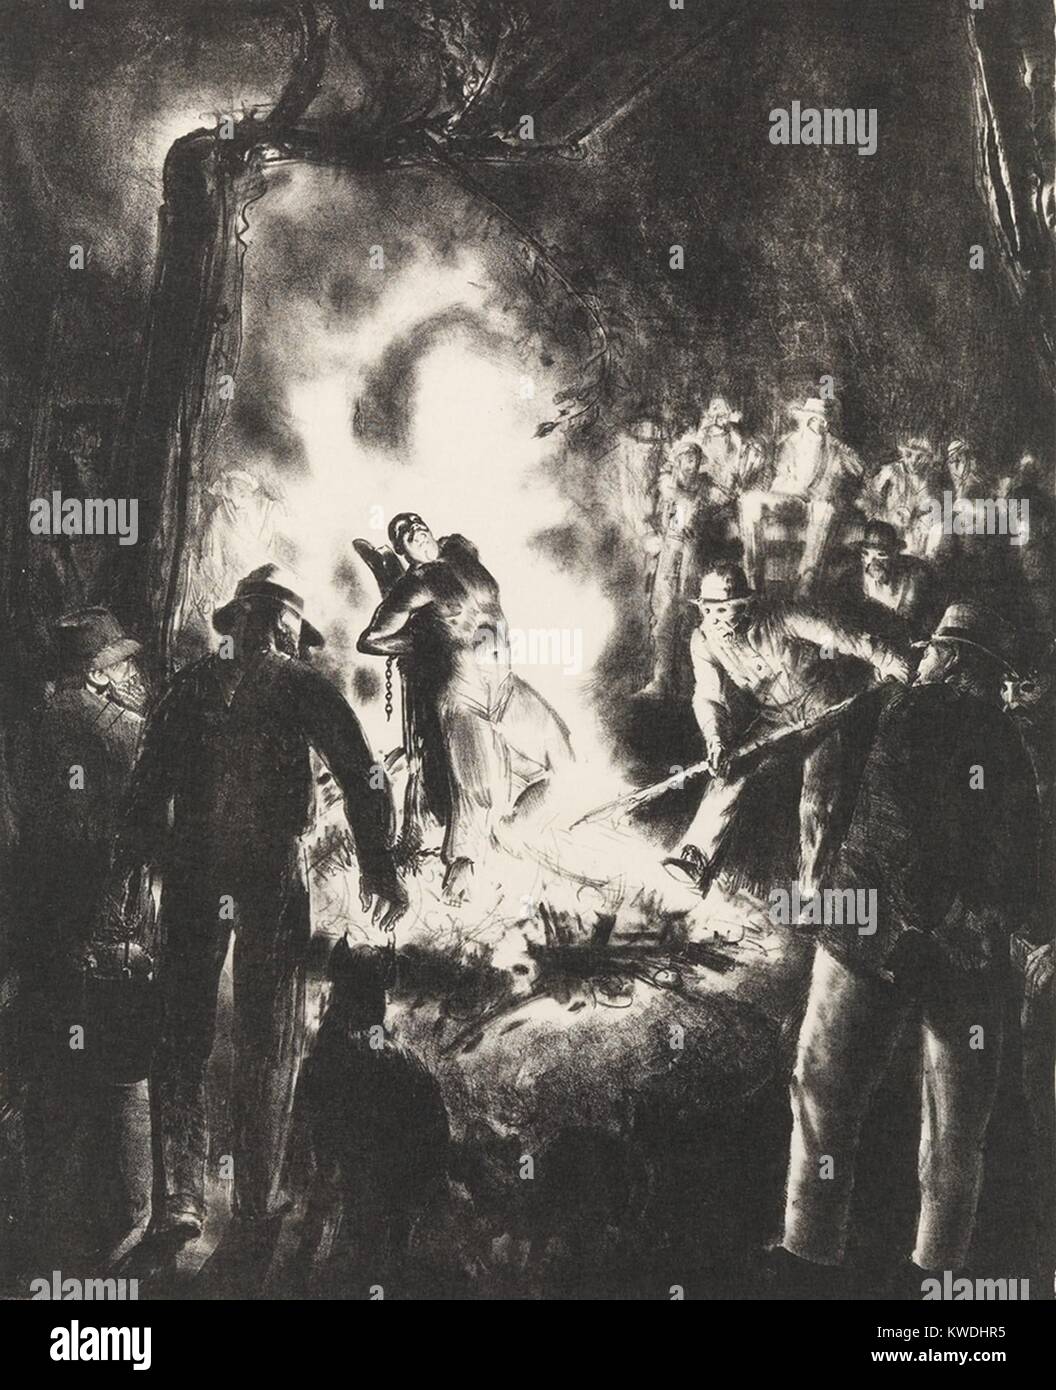 THE LAW IS TOO SLOW, by George Bellows, 1923, American print, lithograph. Brutally graphic image of a lynching, in this case the burning alive of an African American man by a small mob of white men (BSLOC 2017 7 134) Stock Photo